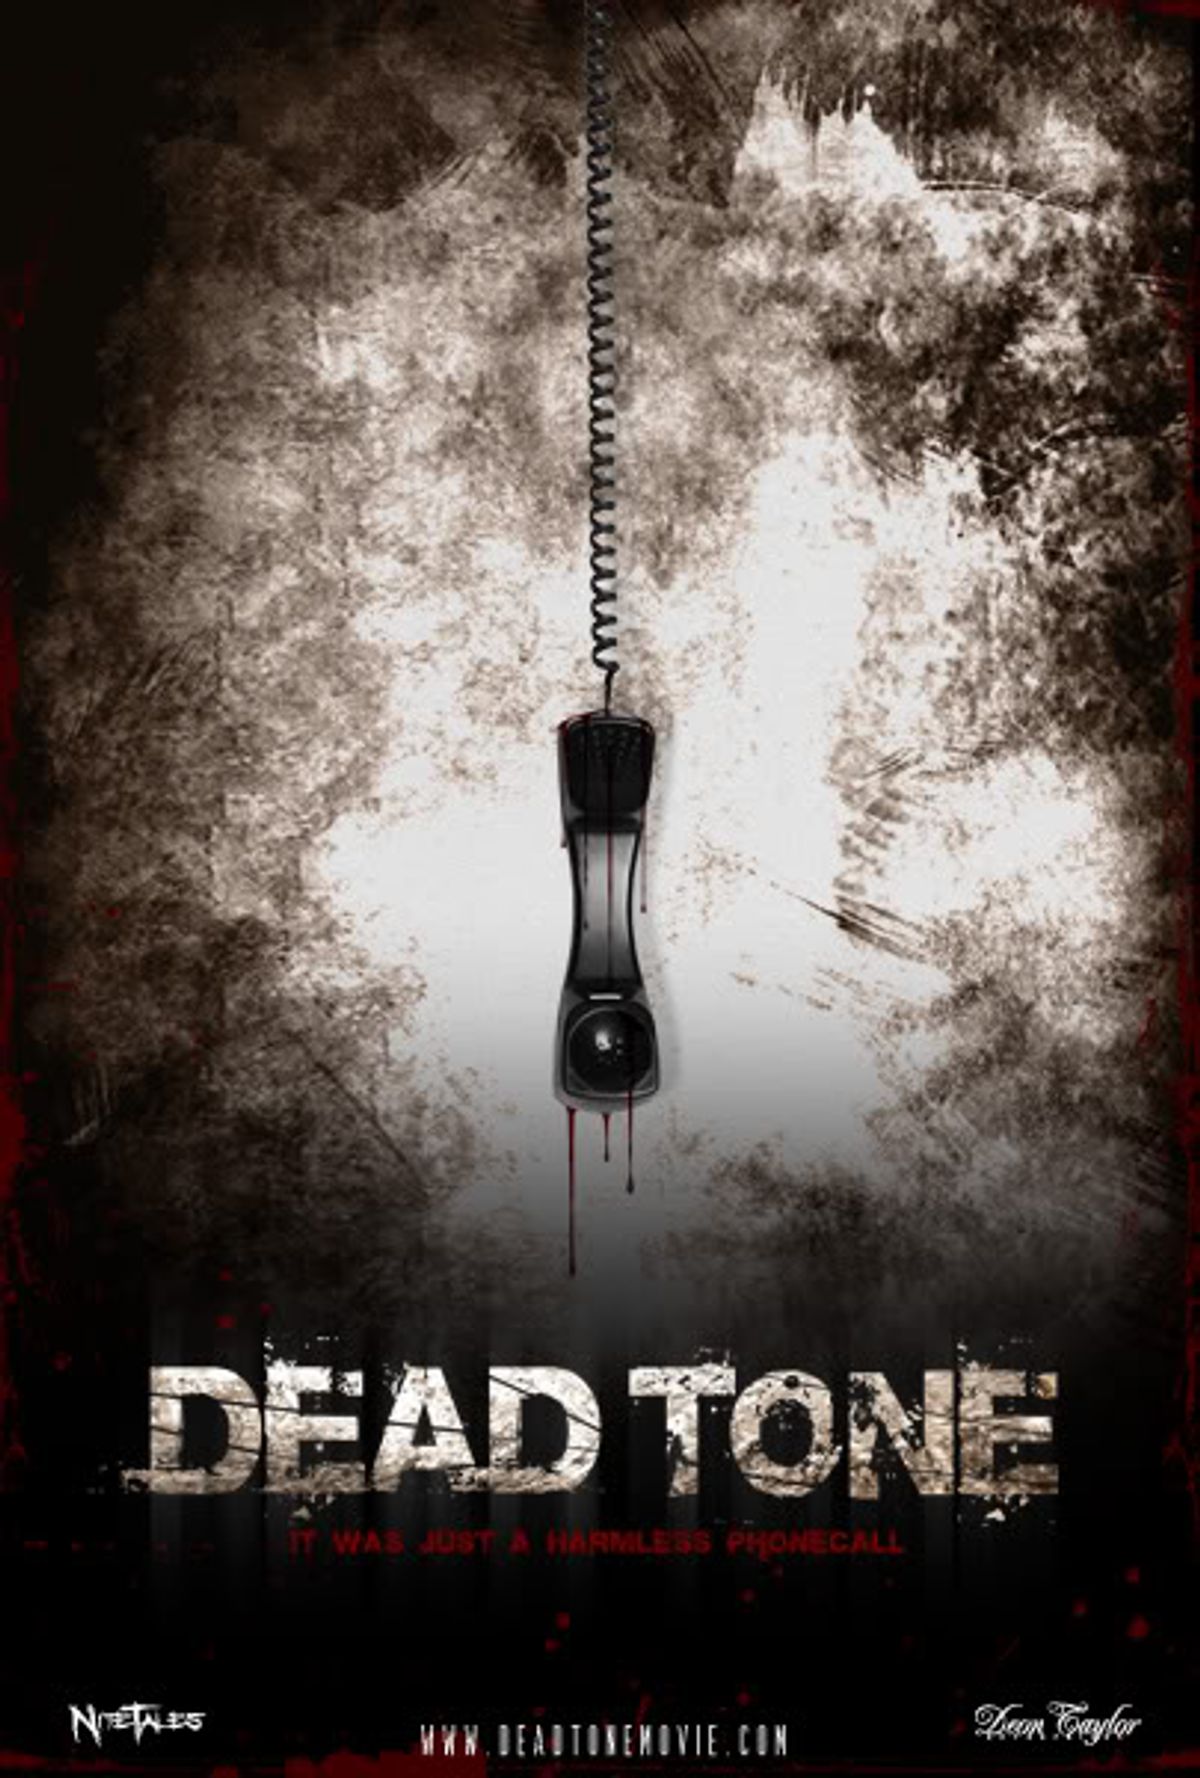 A promotional poster for "Dead Tone." Sadly, Flavor Flav is not pictured.